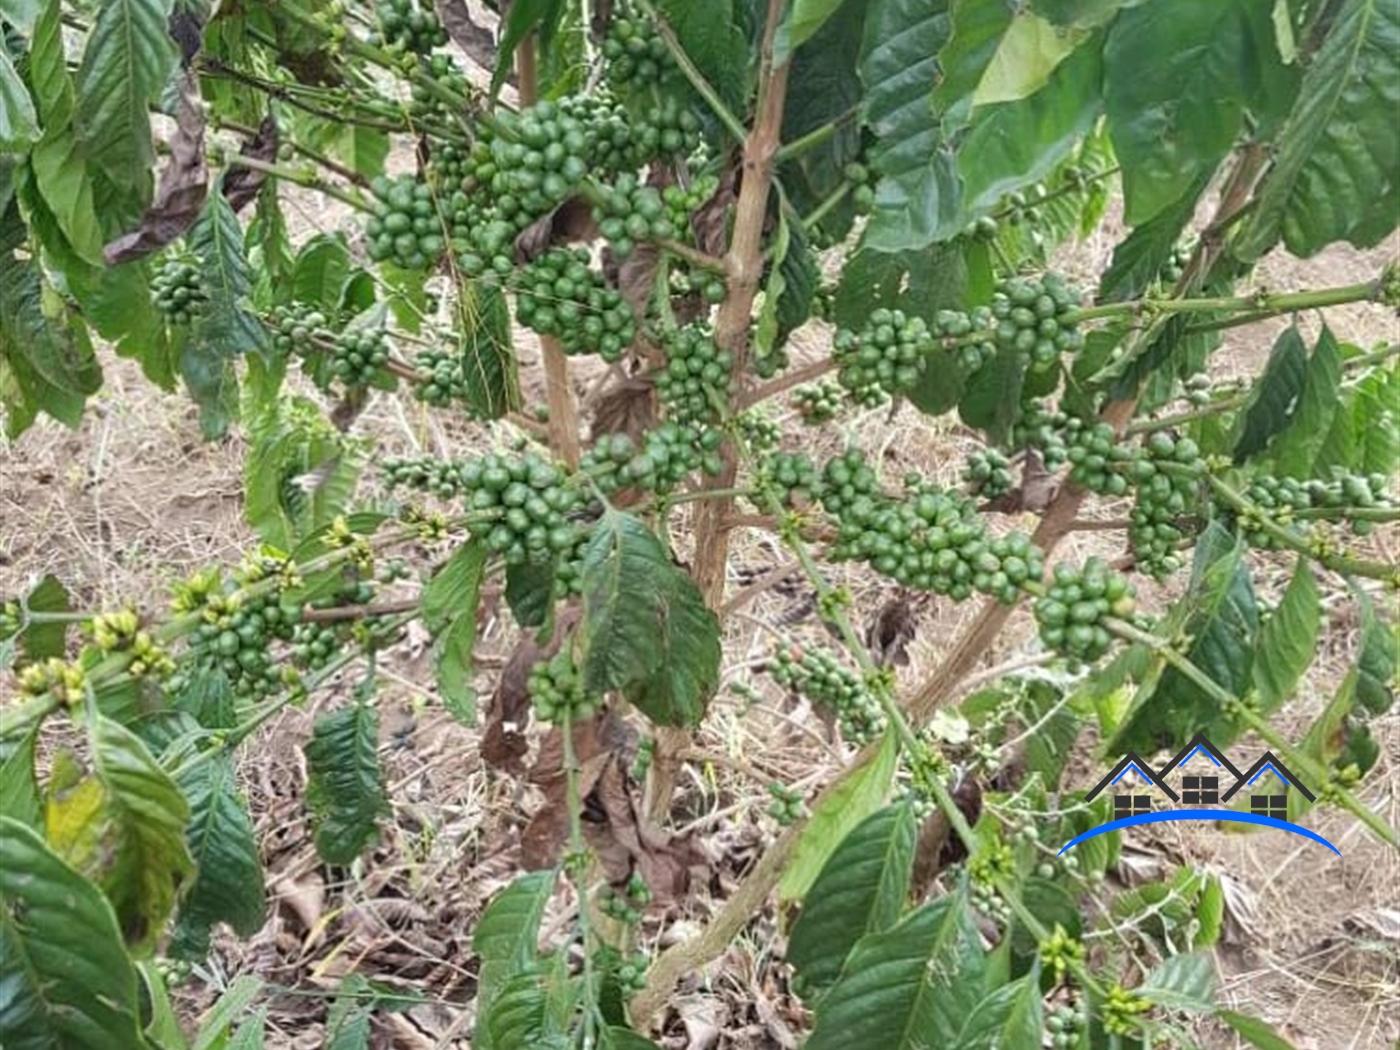 Agricultural Land for sale in Nama Mityana